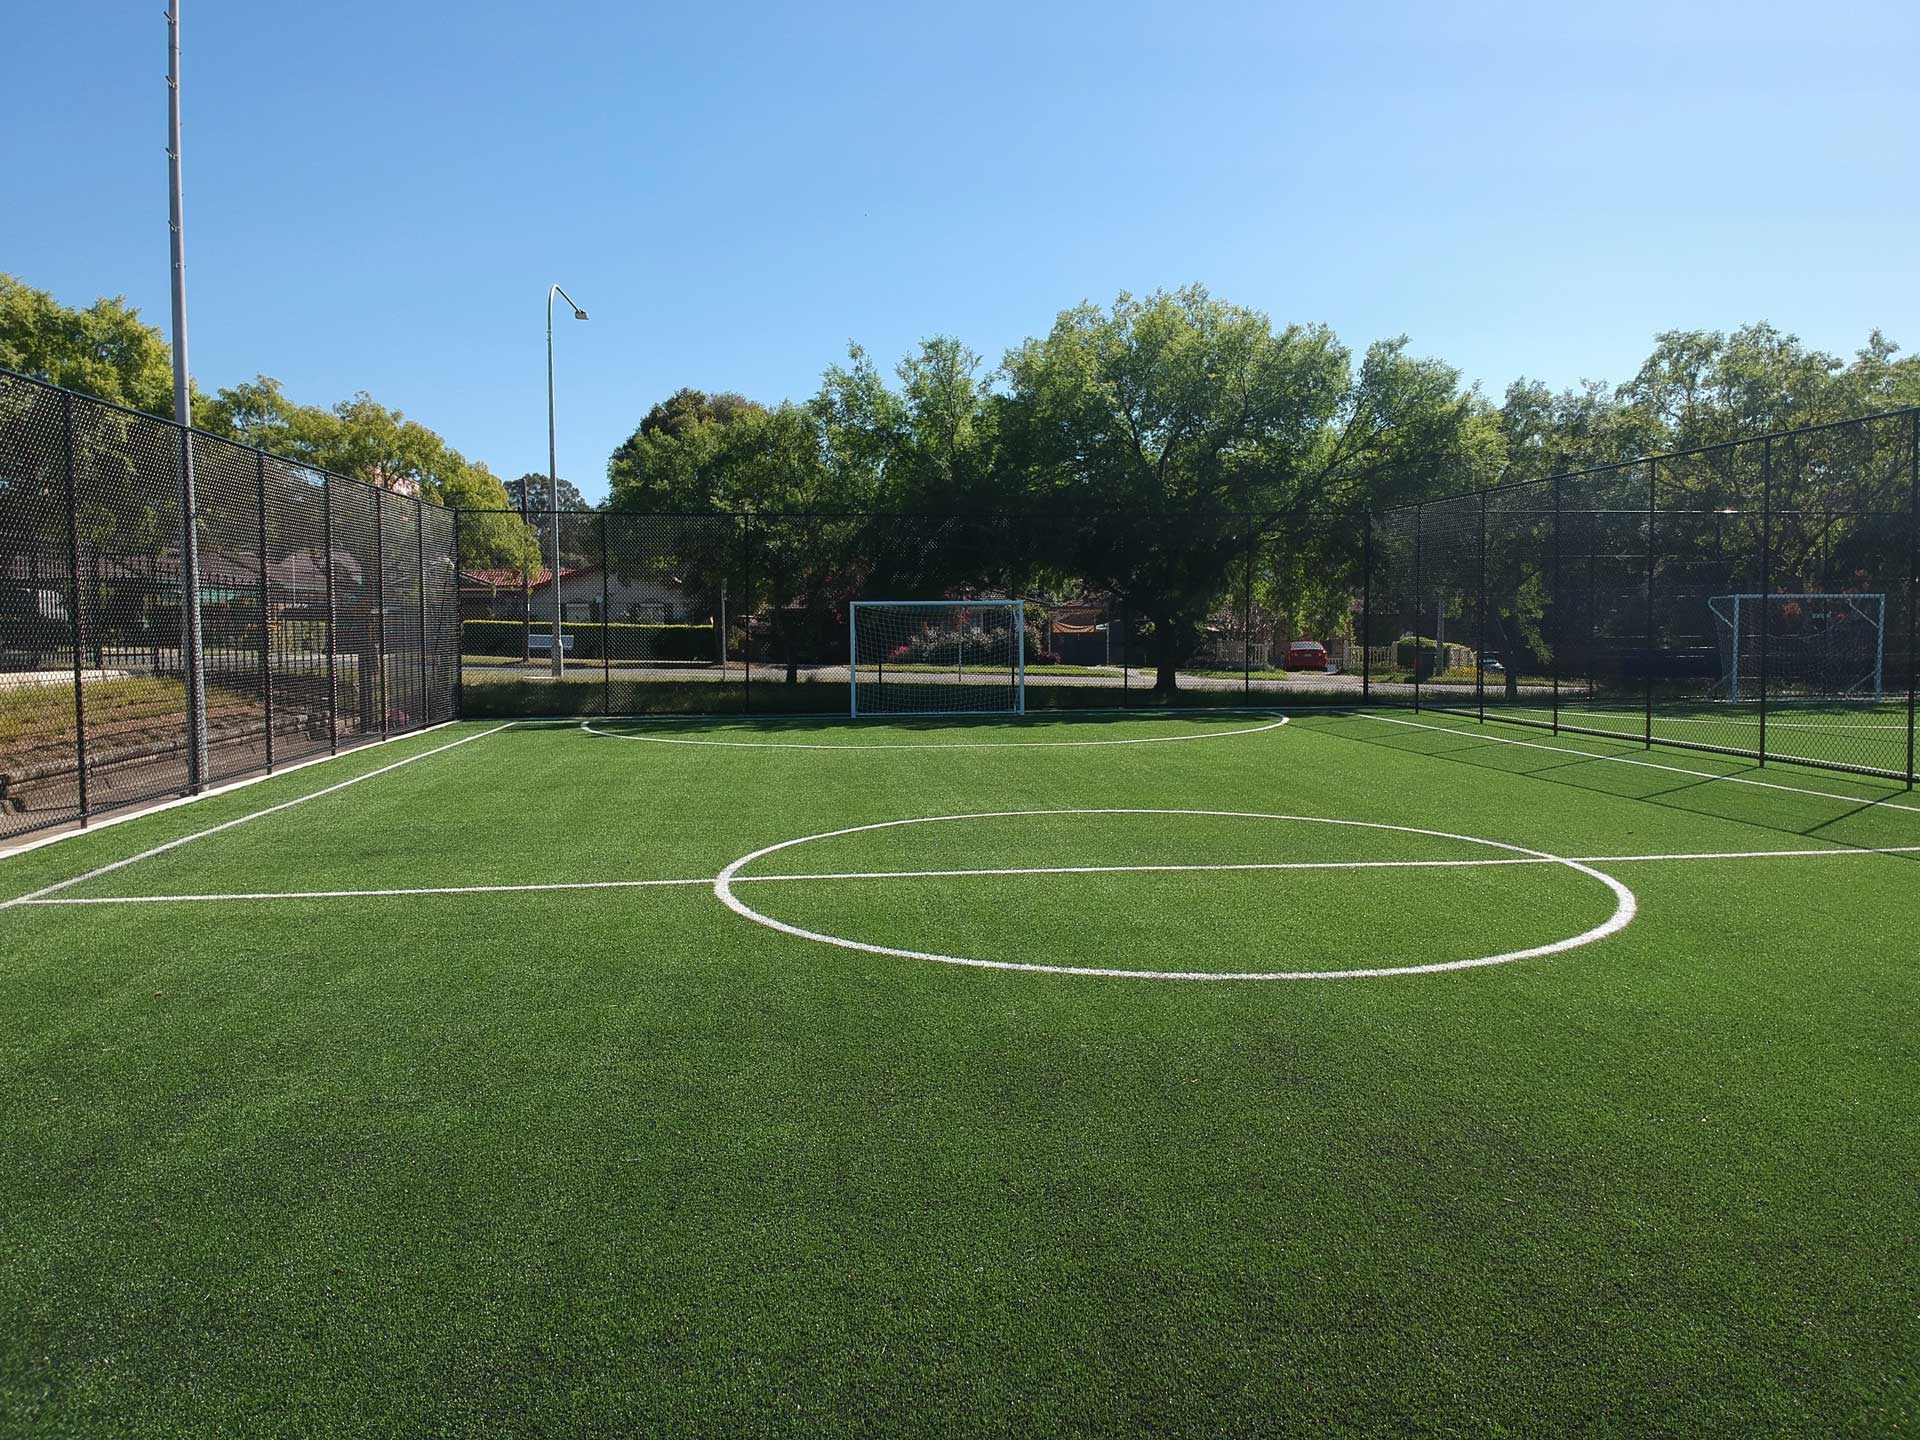 Photo of the outdoor futsal court at Emerson Park